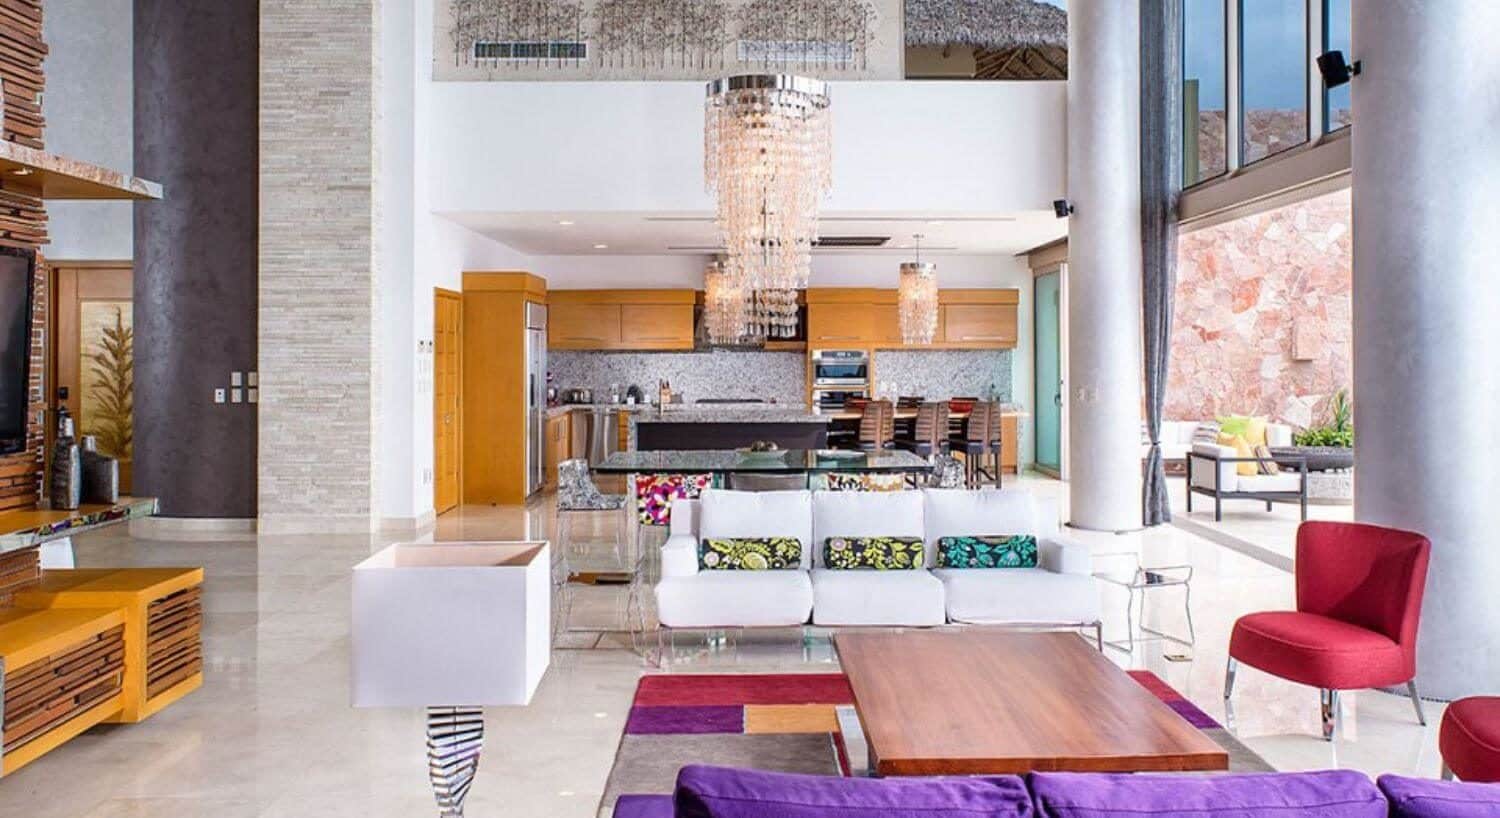 A large open room with a living area with white, purple and red furnishings, a dining area, and large kitchen, opening up to an outdoor living area.